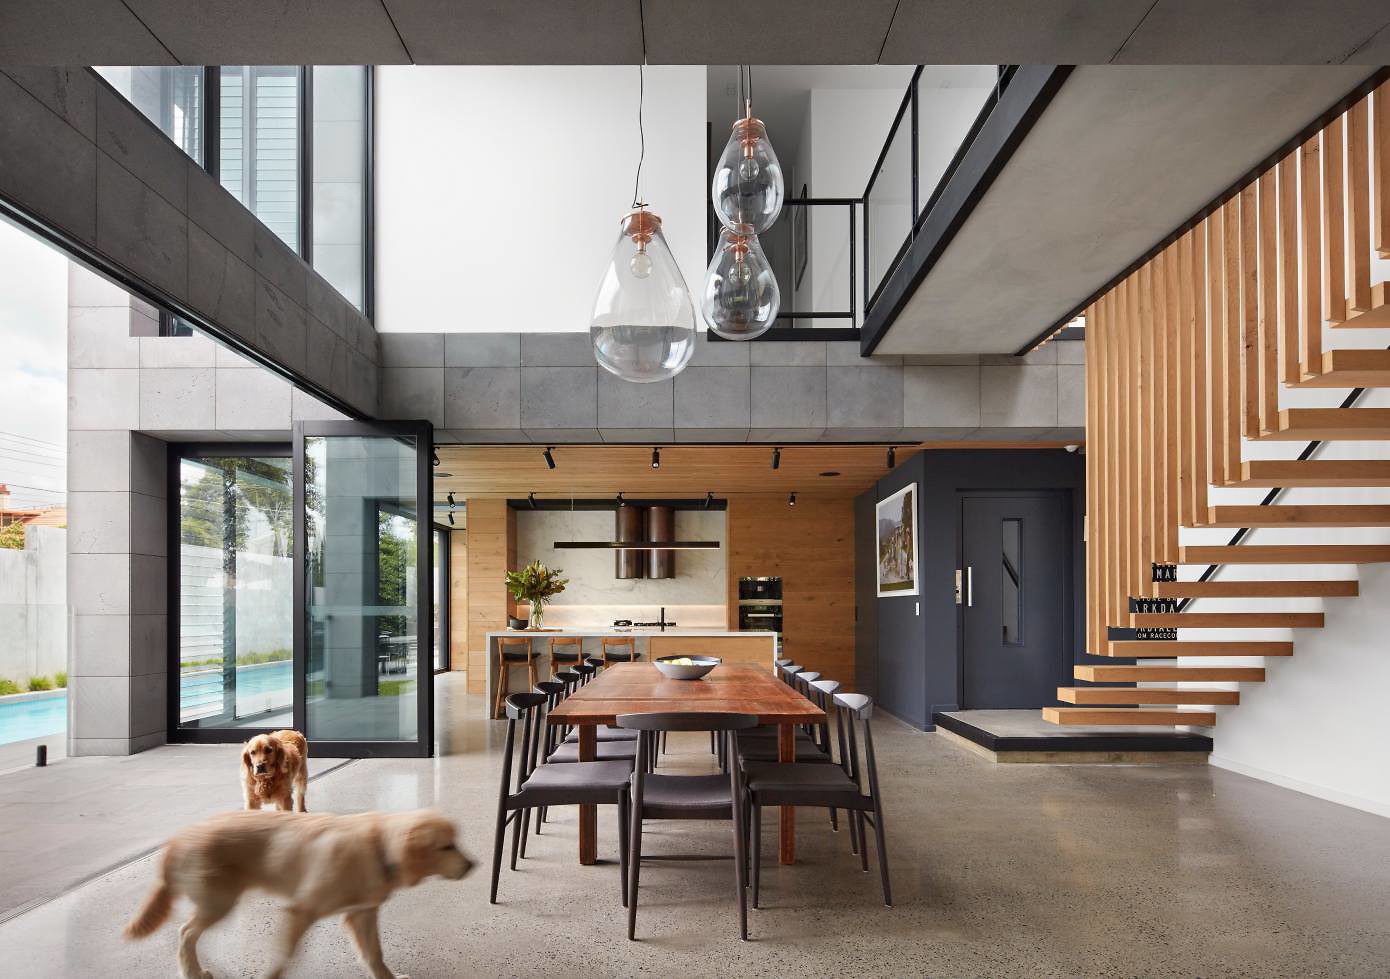 Quarry House by Finnis Architects